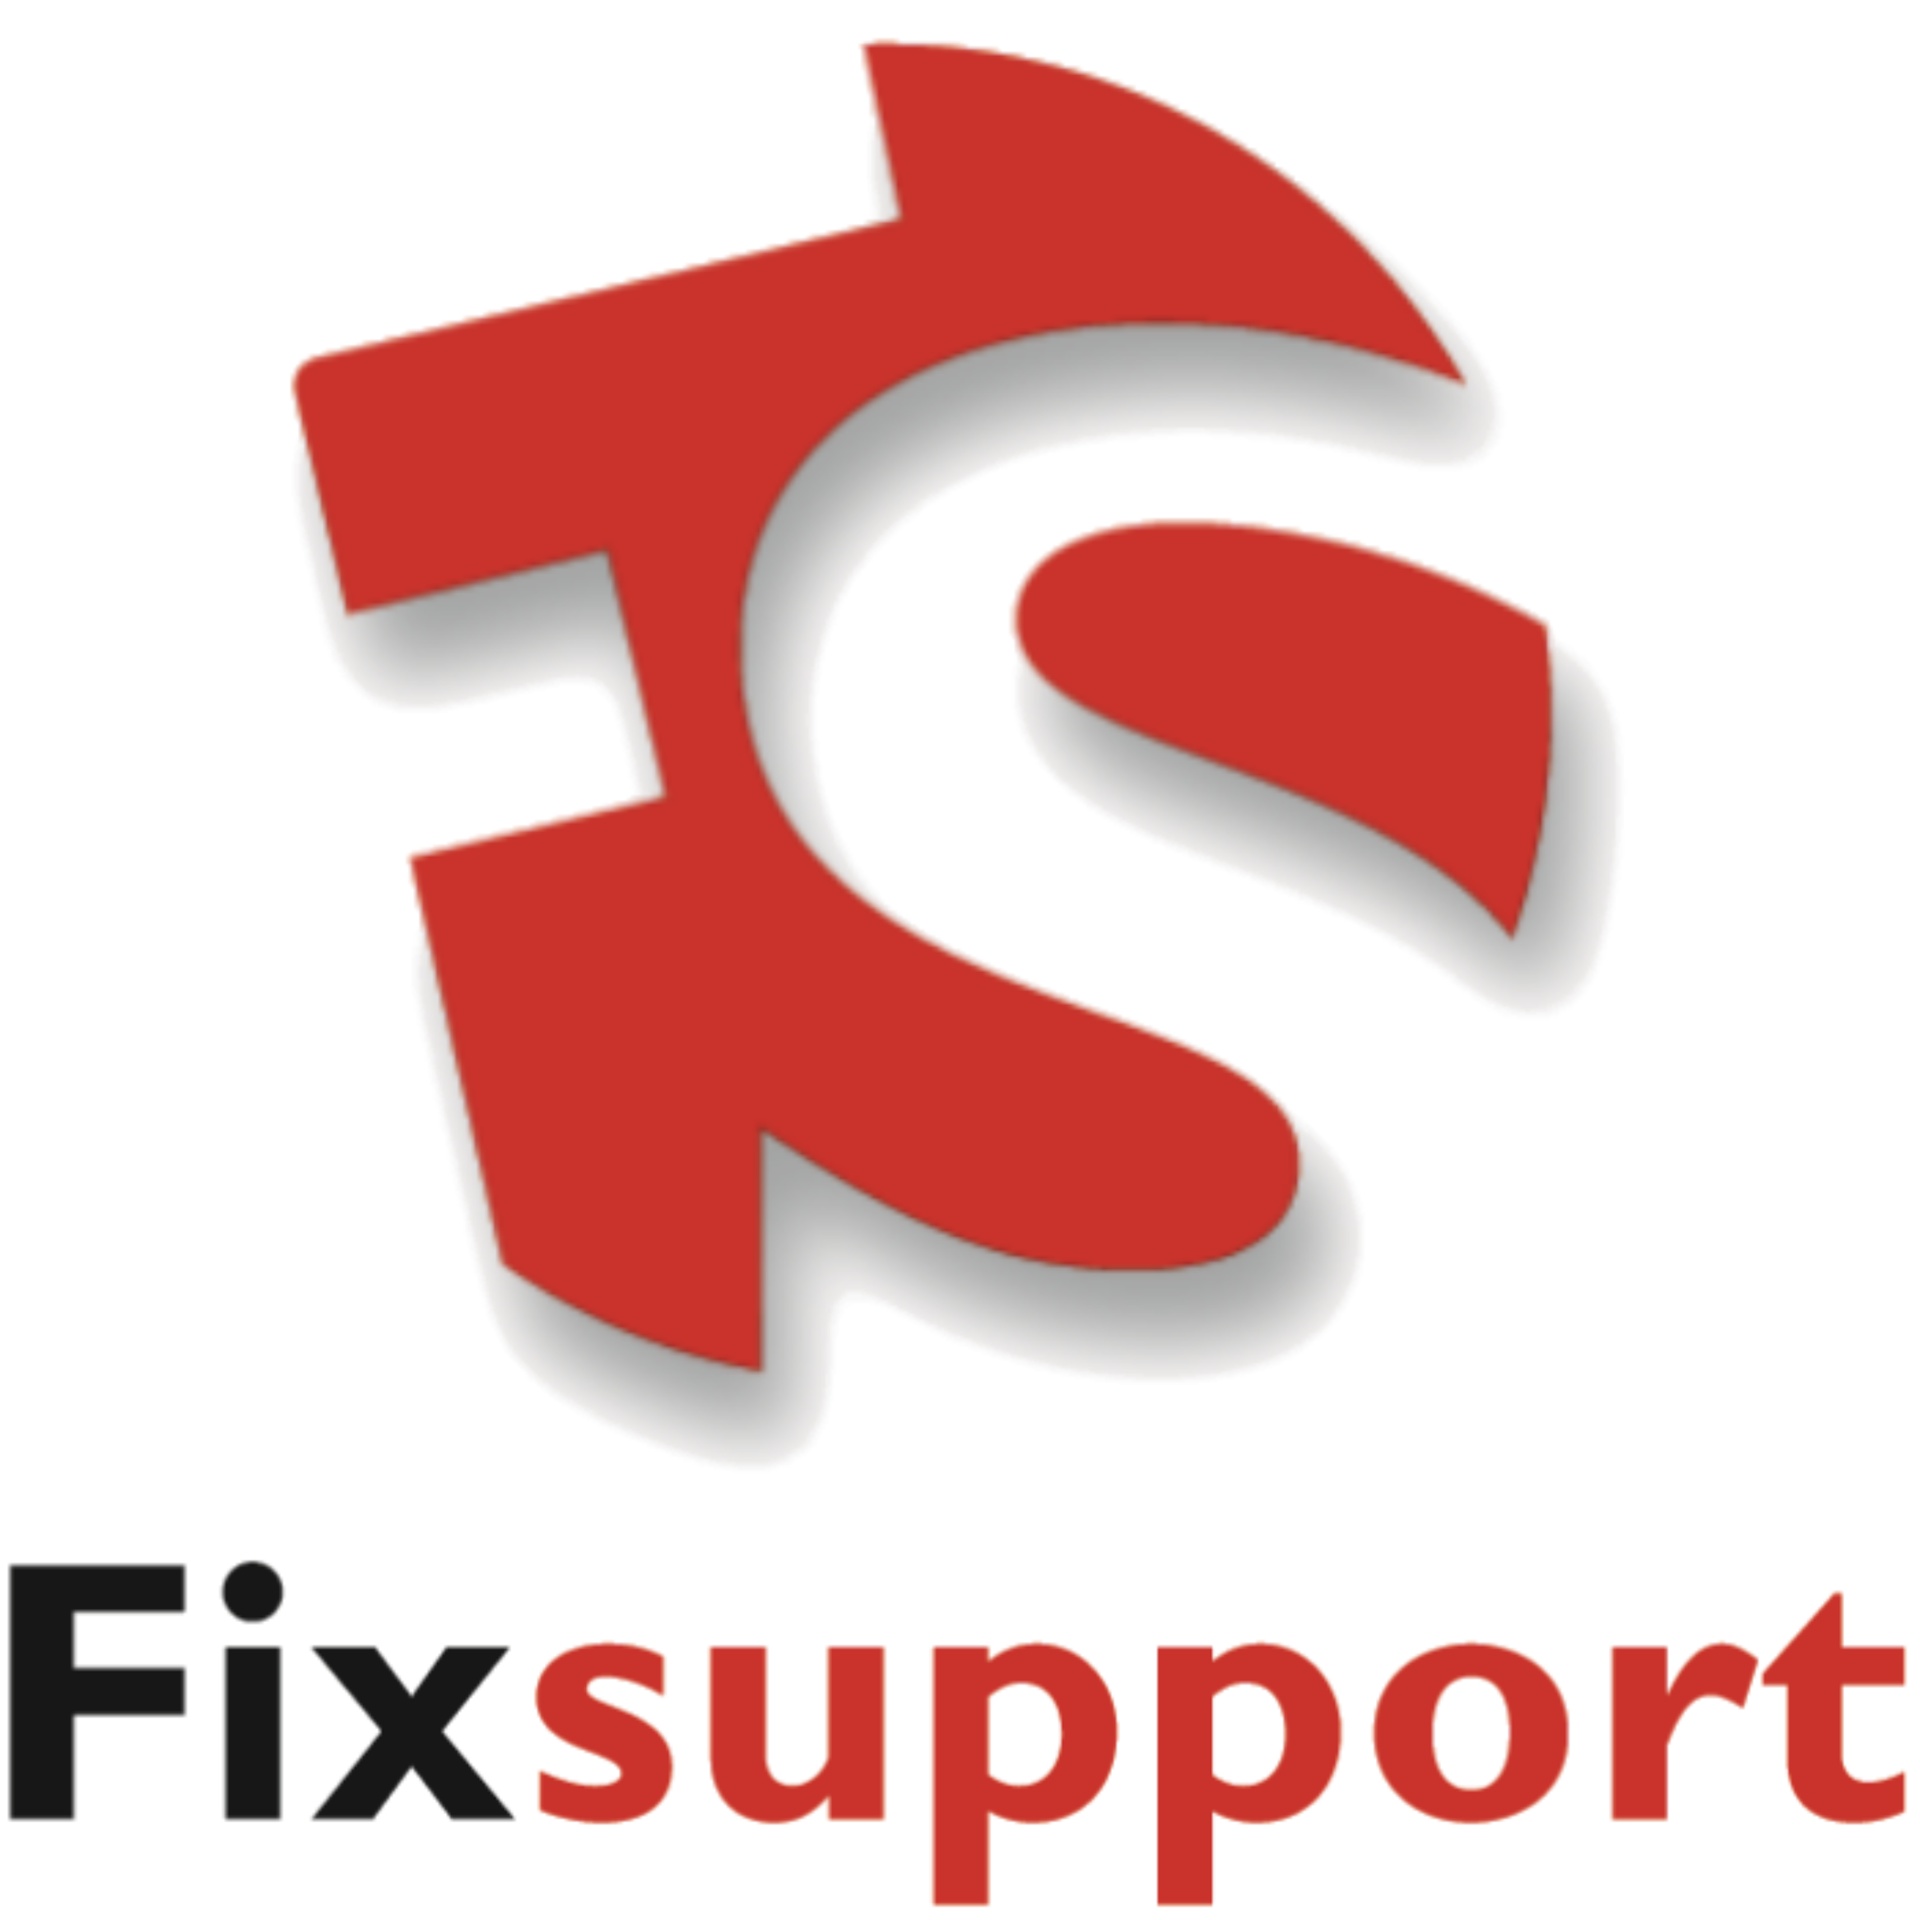 Fixsupport